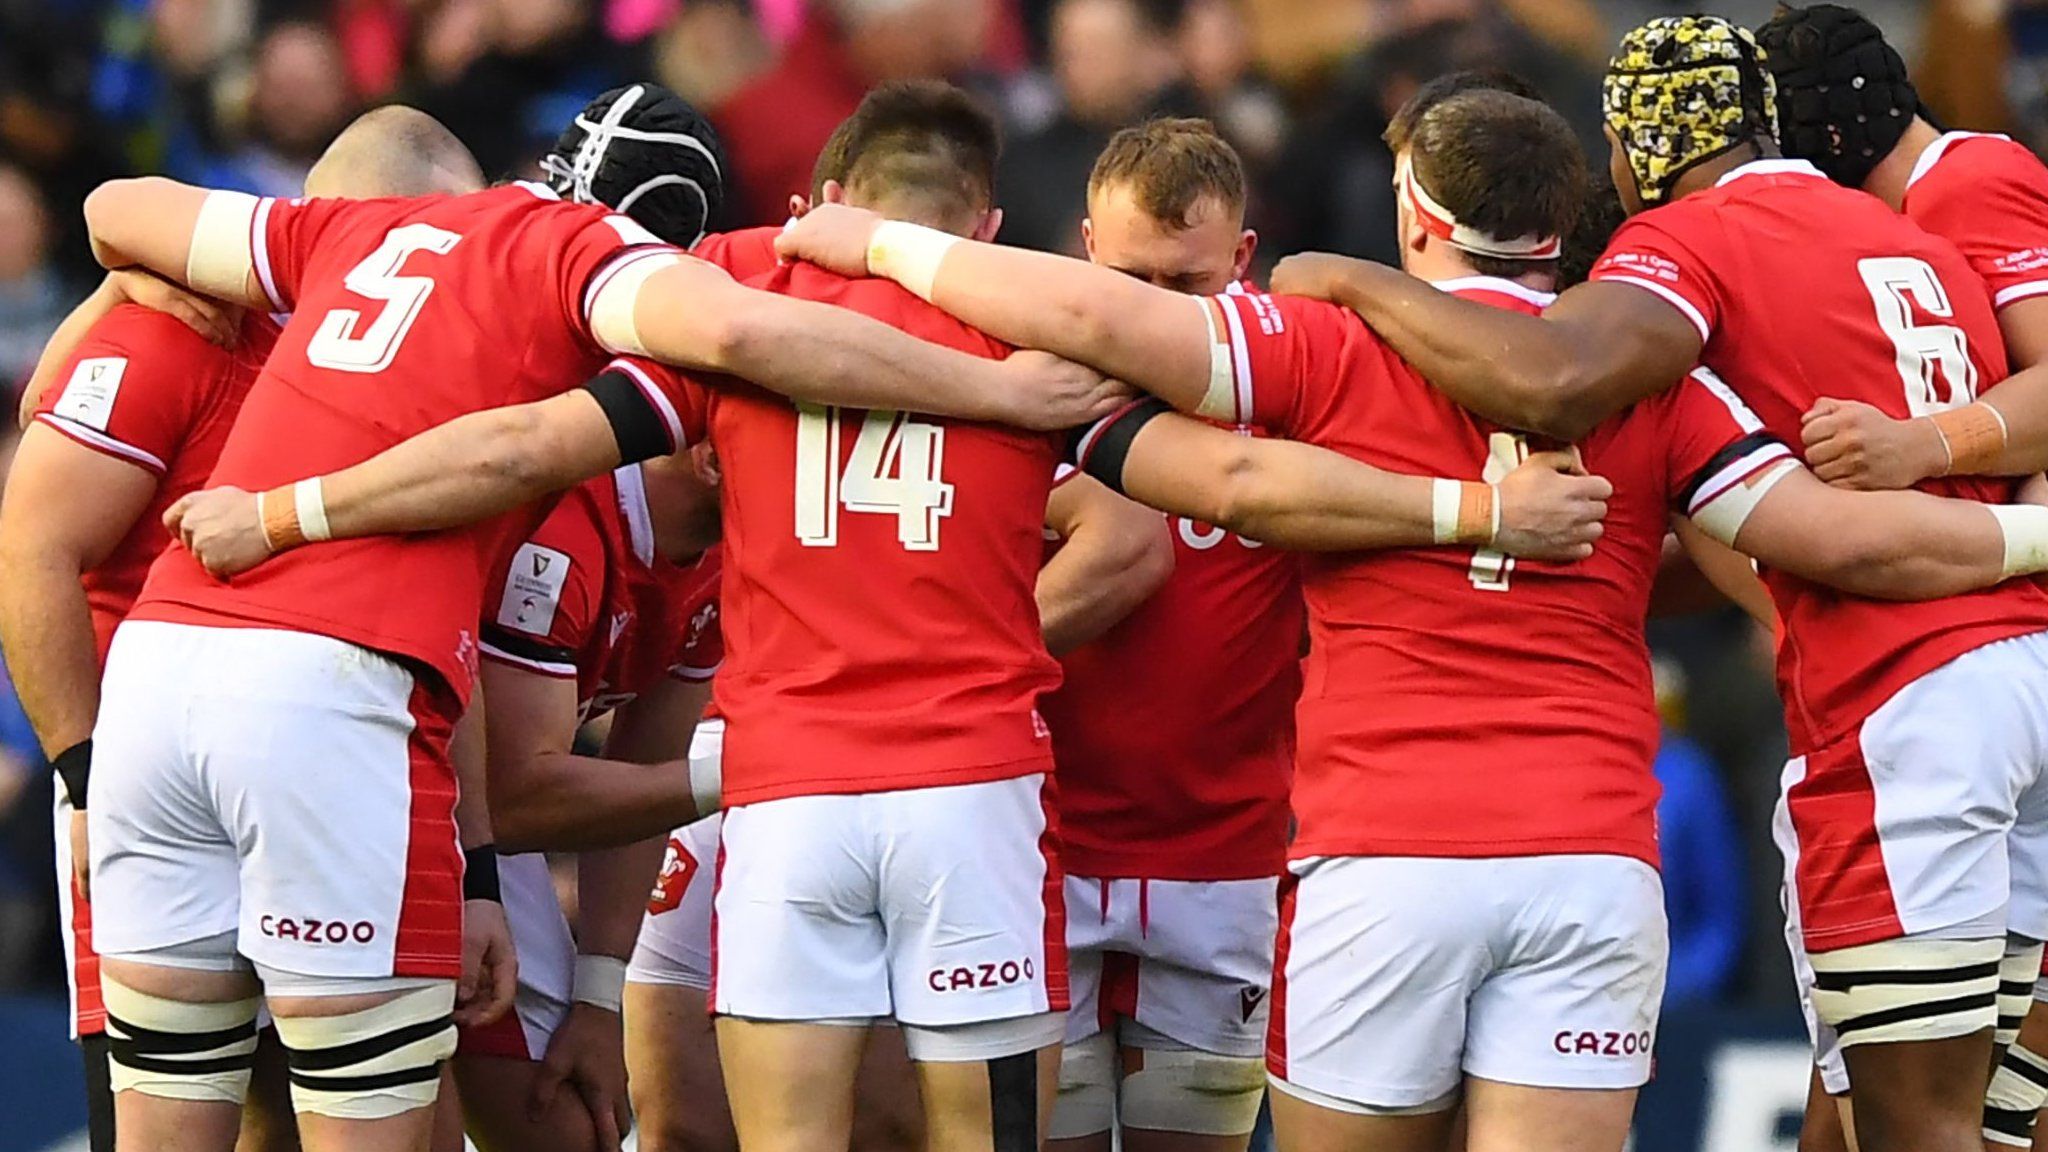 Wales players in a huddle before they take on Scotland in the Six Nations